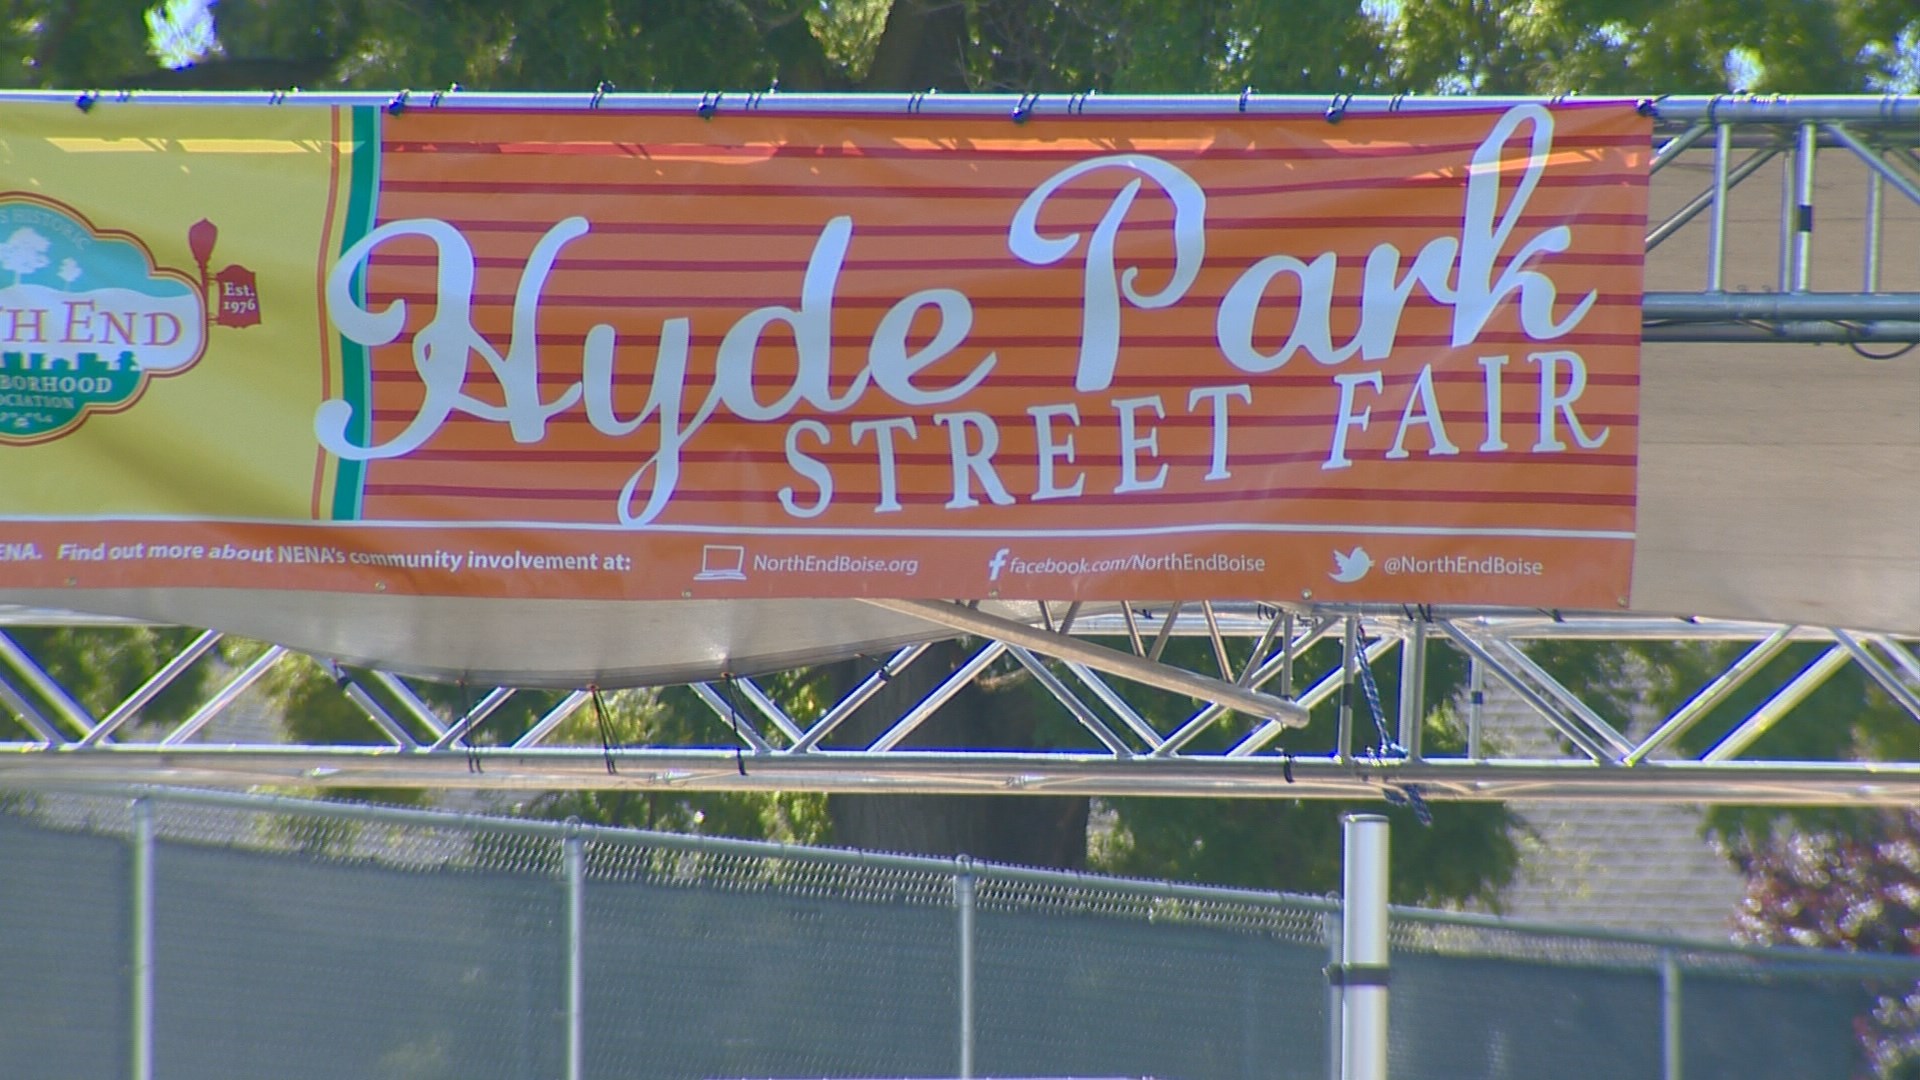 Lots to do at Hyde Park Street Fair